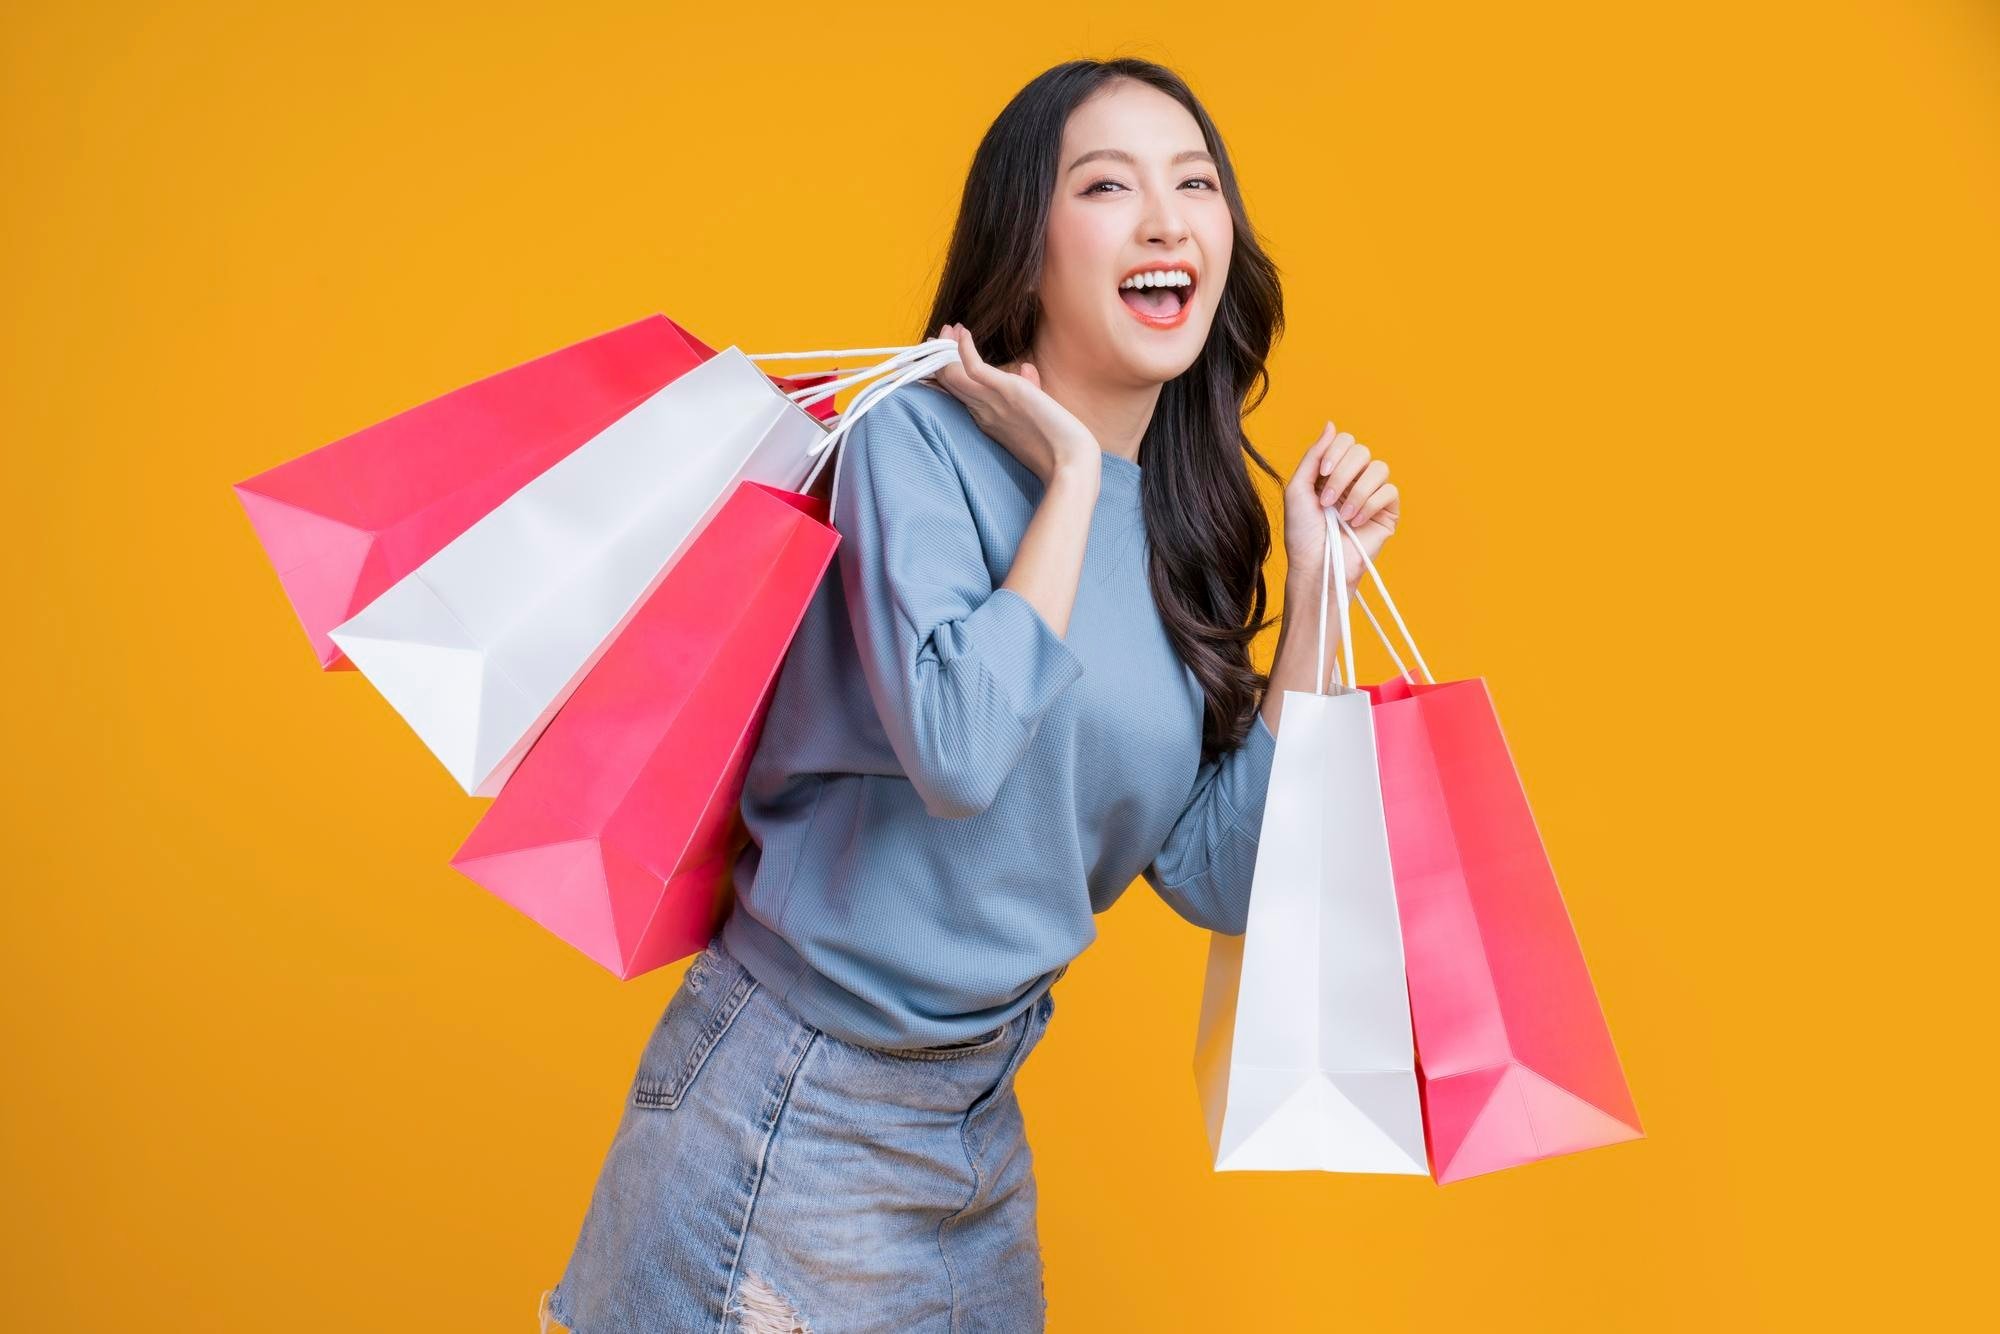 asian happy female woman girl holds colourful shopping packages standing yellow background studio shot close up portrait young beautiful attractive girl smiling looking camera with bags 609648 3029 1